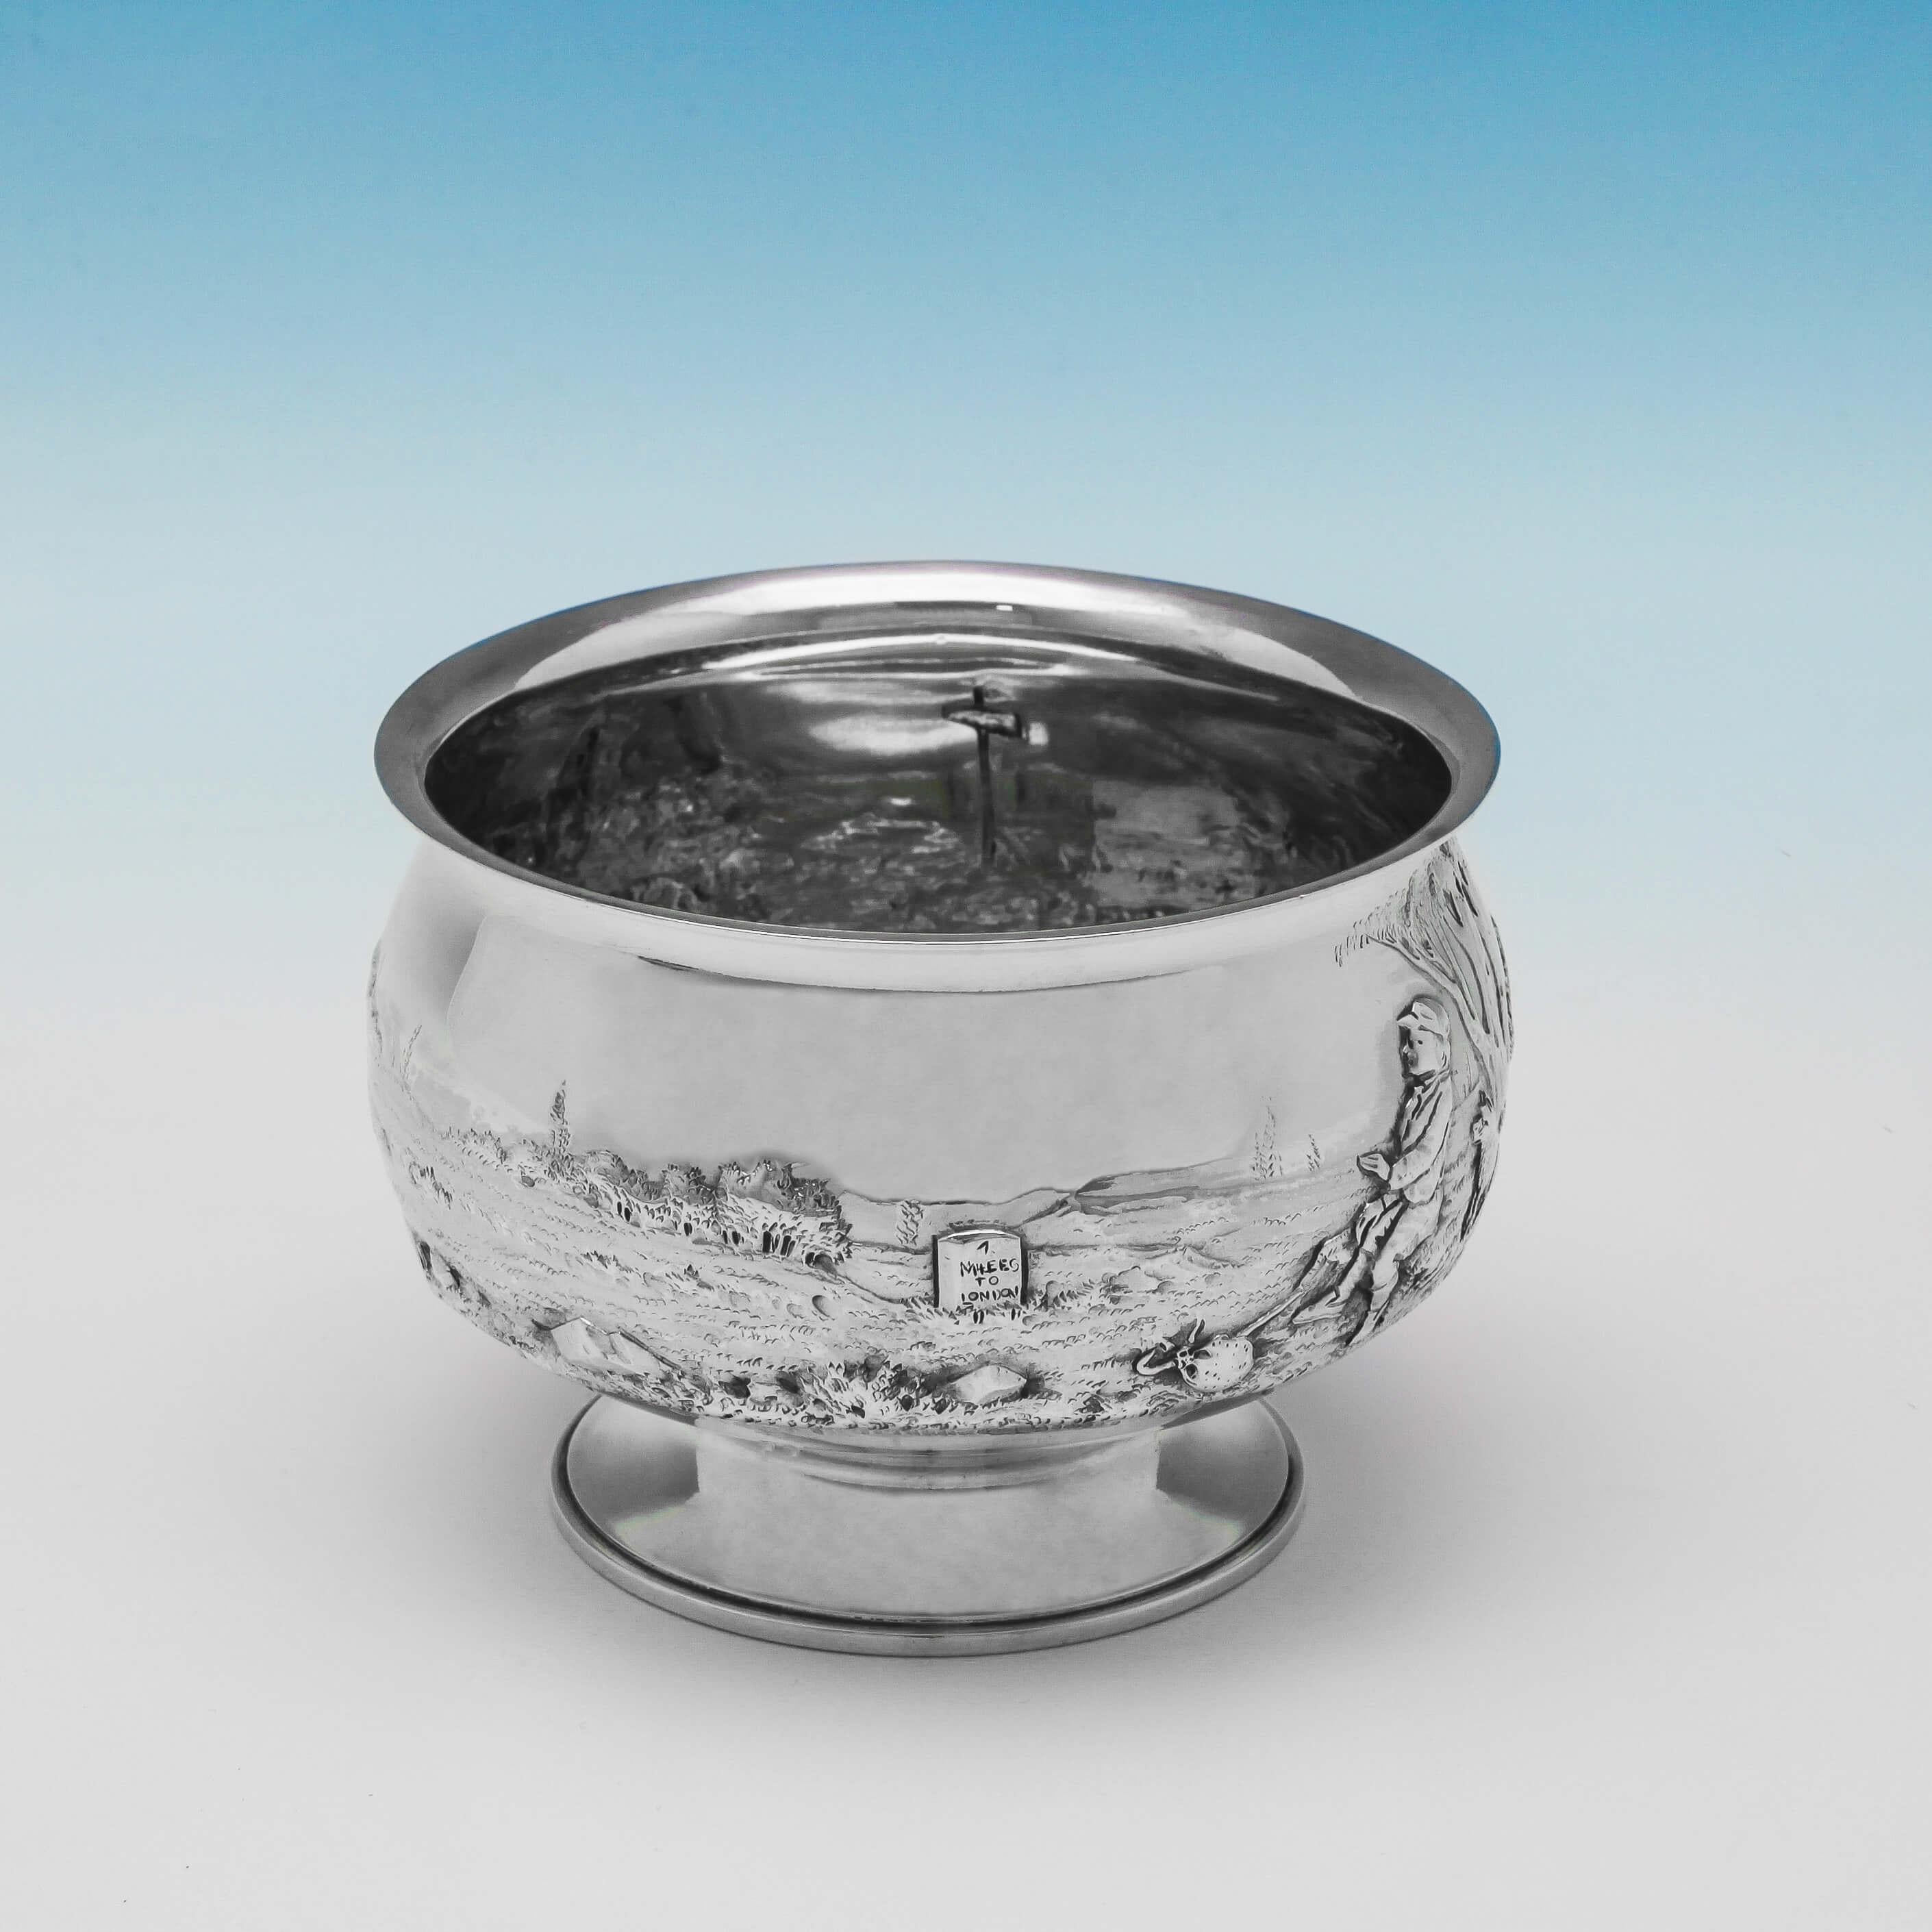 Hallmarked in London in 1908 by Holland, Aldwinckle & Slater, this charming Edwardian Antique, Sterling Silver Bowl, has a chased scene depicting Dick Whittington and his cat on their way to London. The bowl is 3